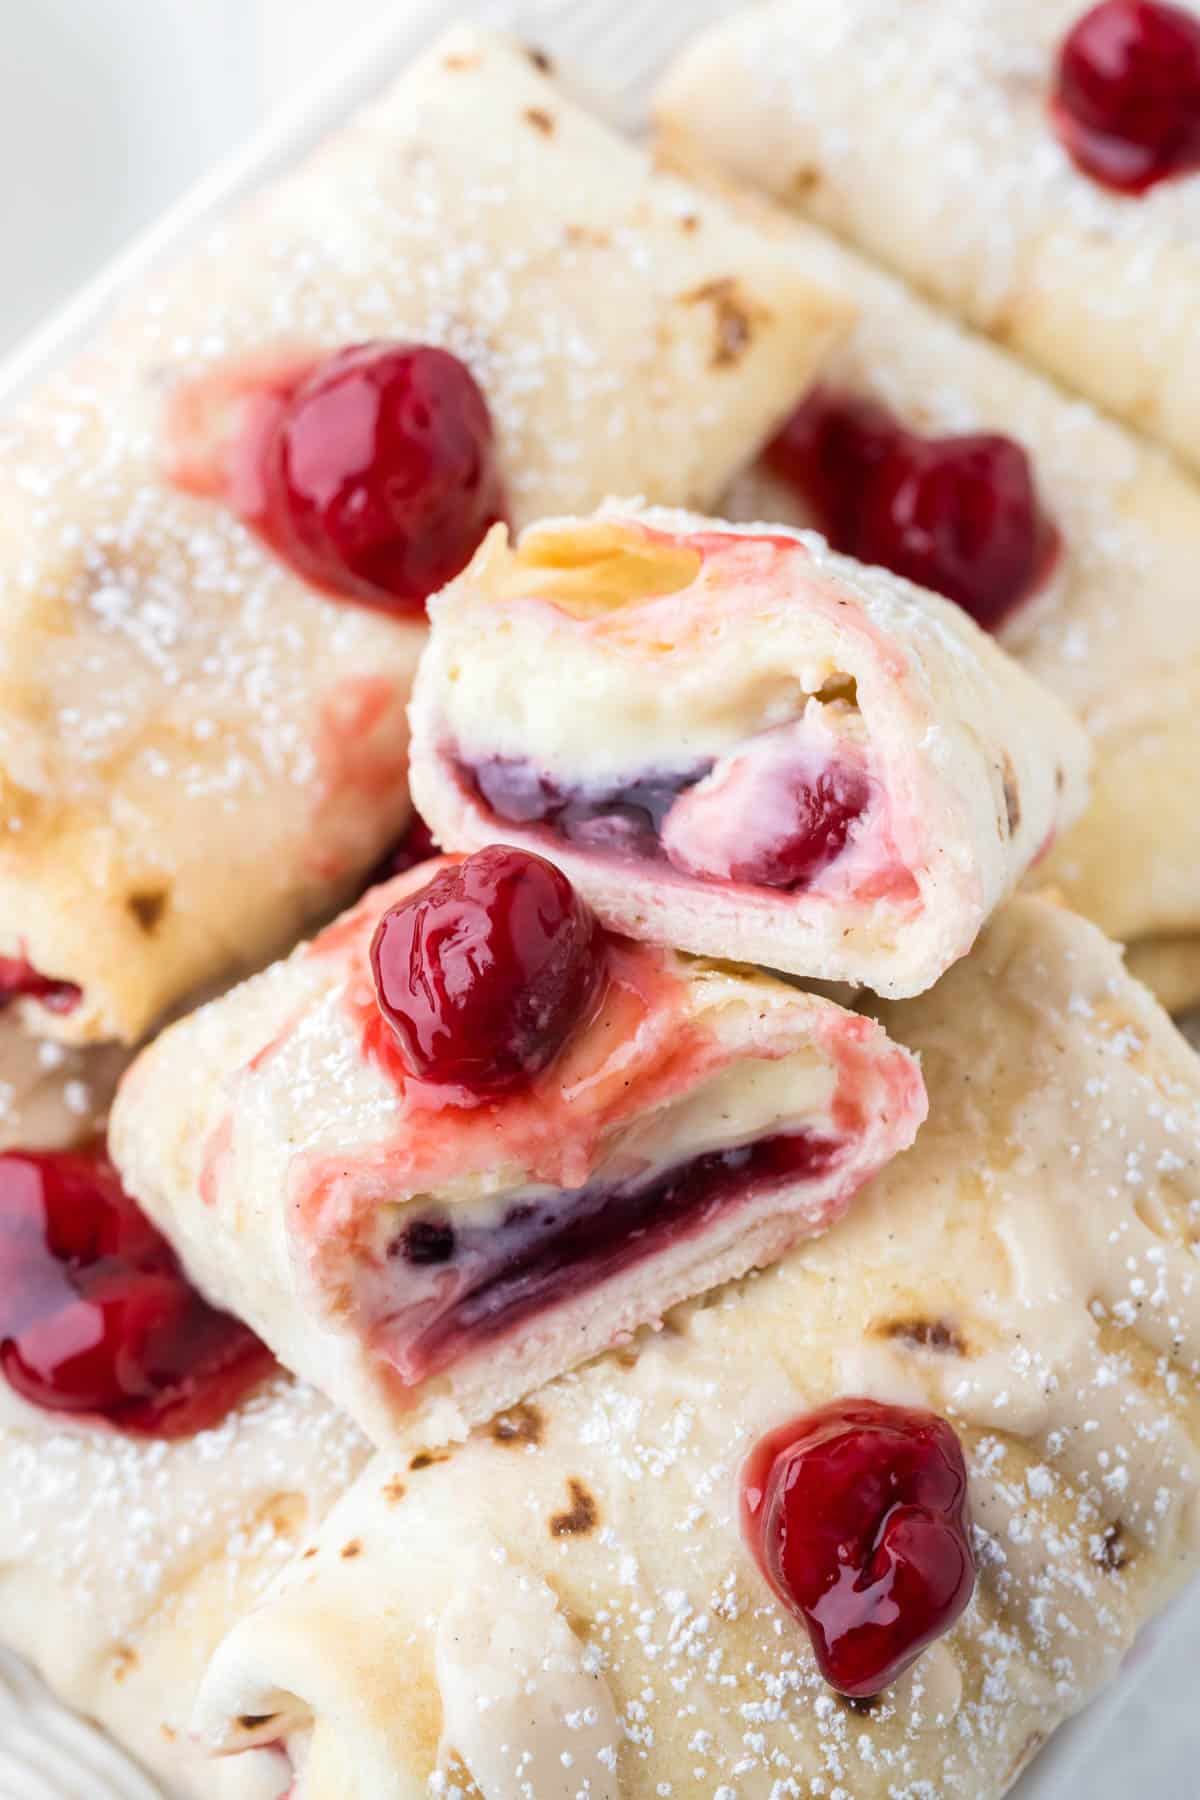 A cheesecake chimichangas with cherry filling that has been sliced in half on top of more chimichangas.